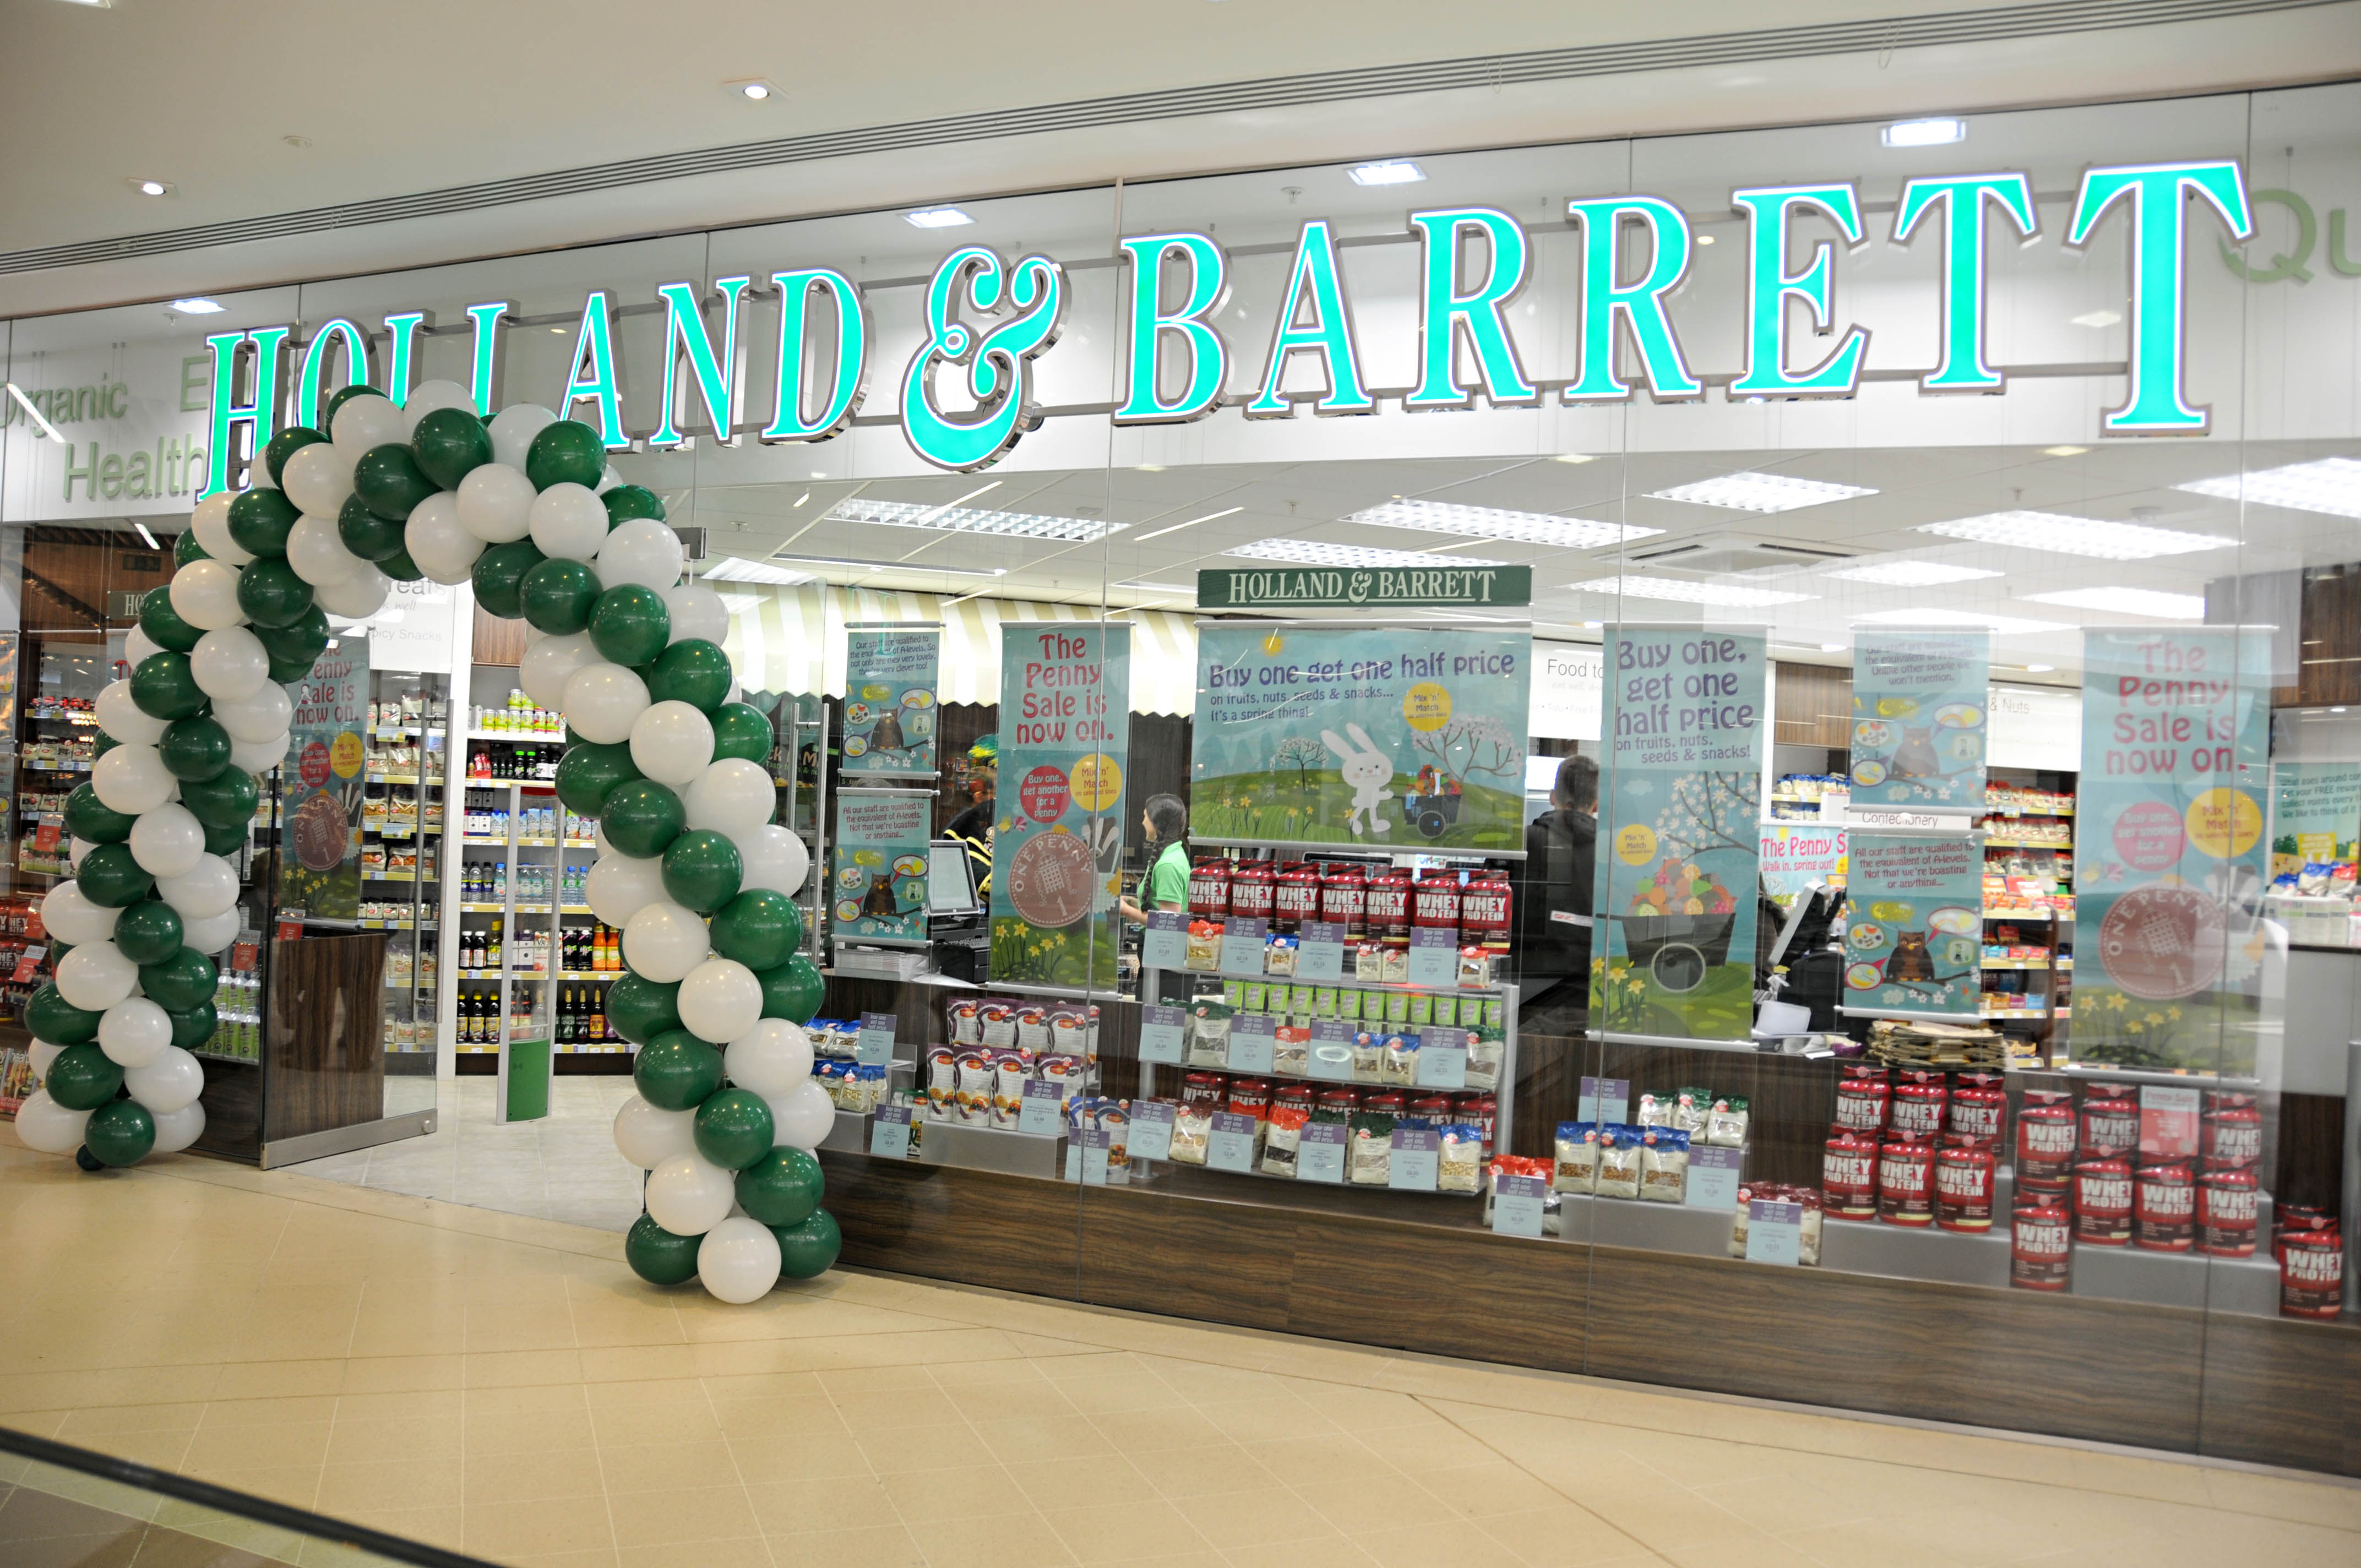 Holland & Barrett is going through a period of strong growth momentum